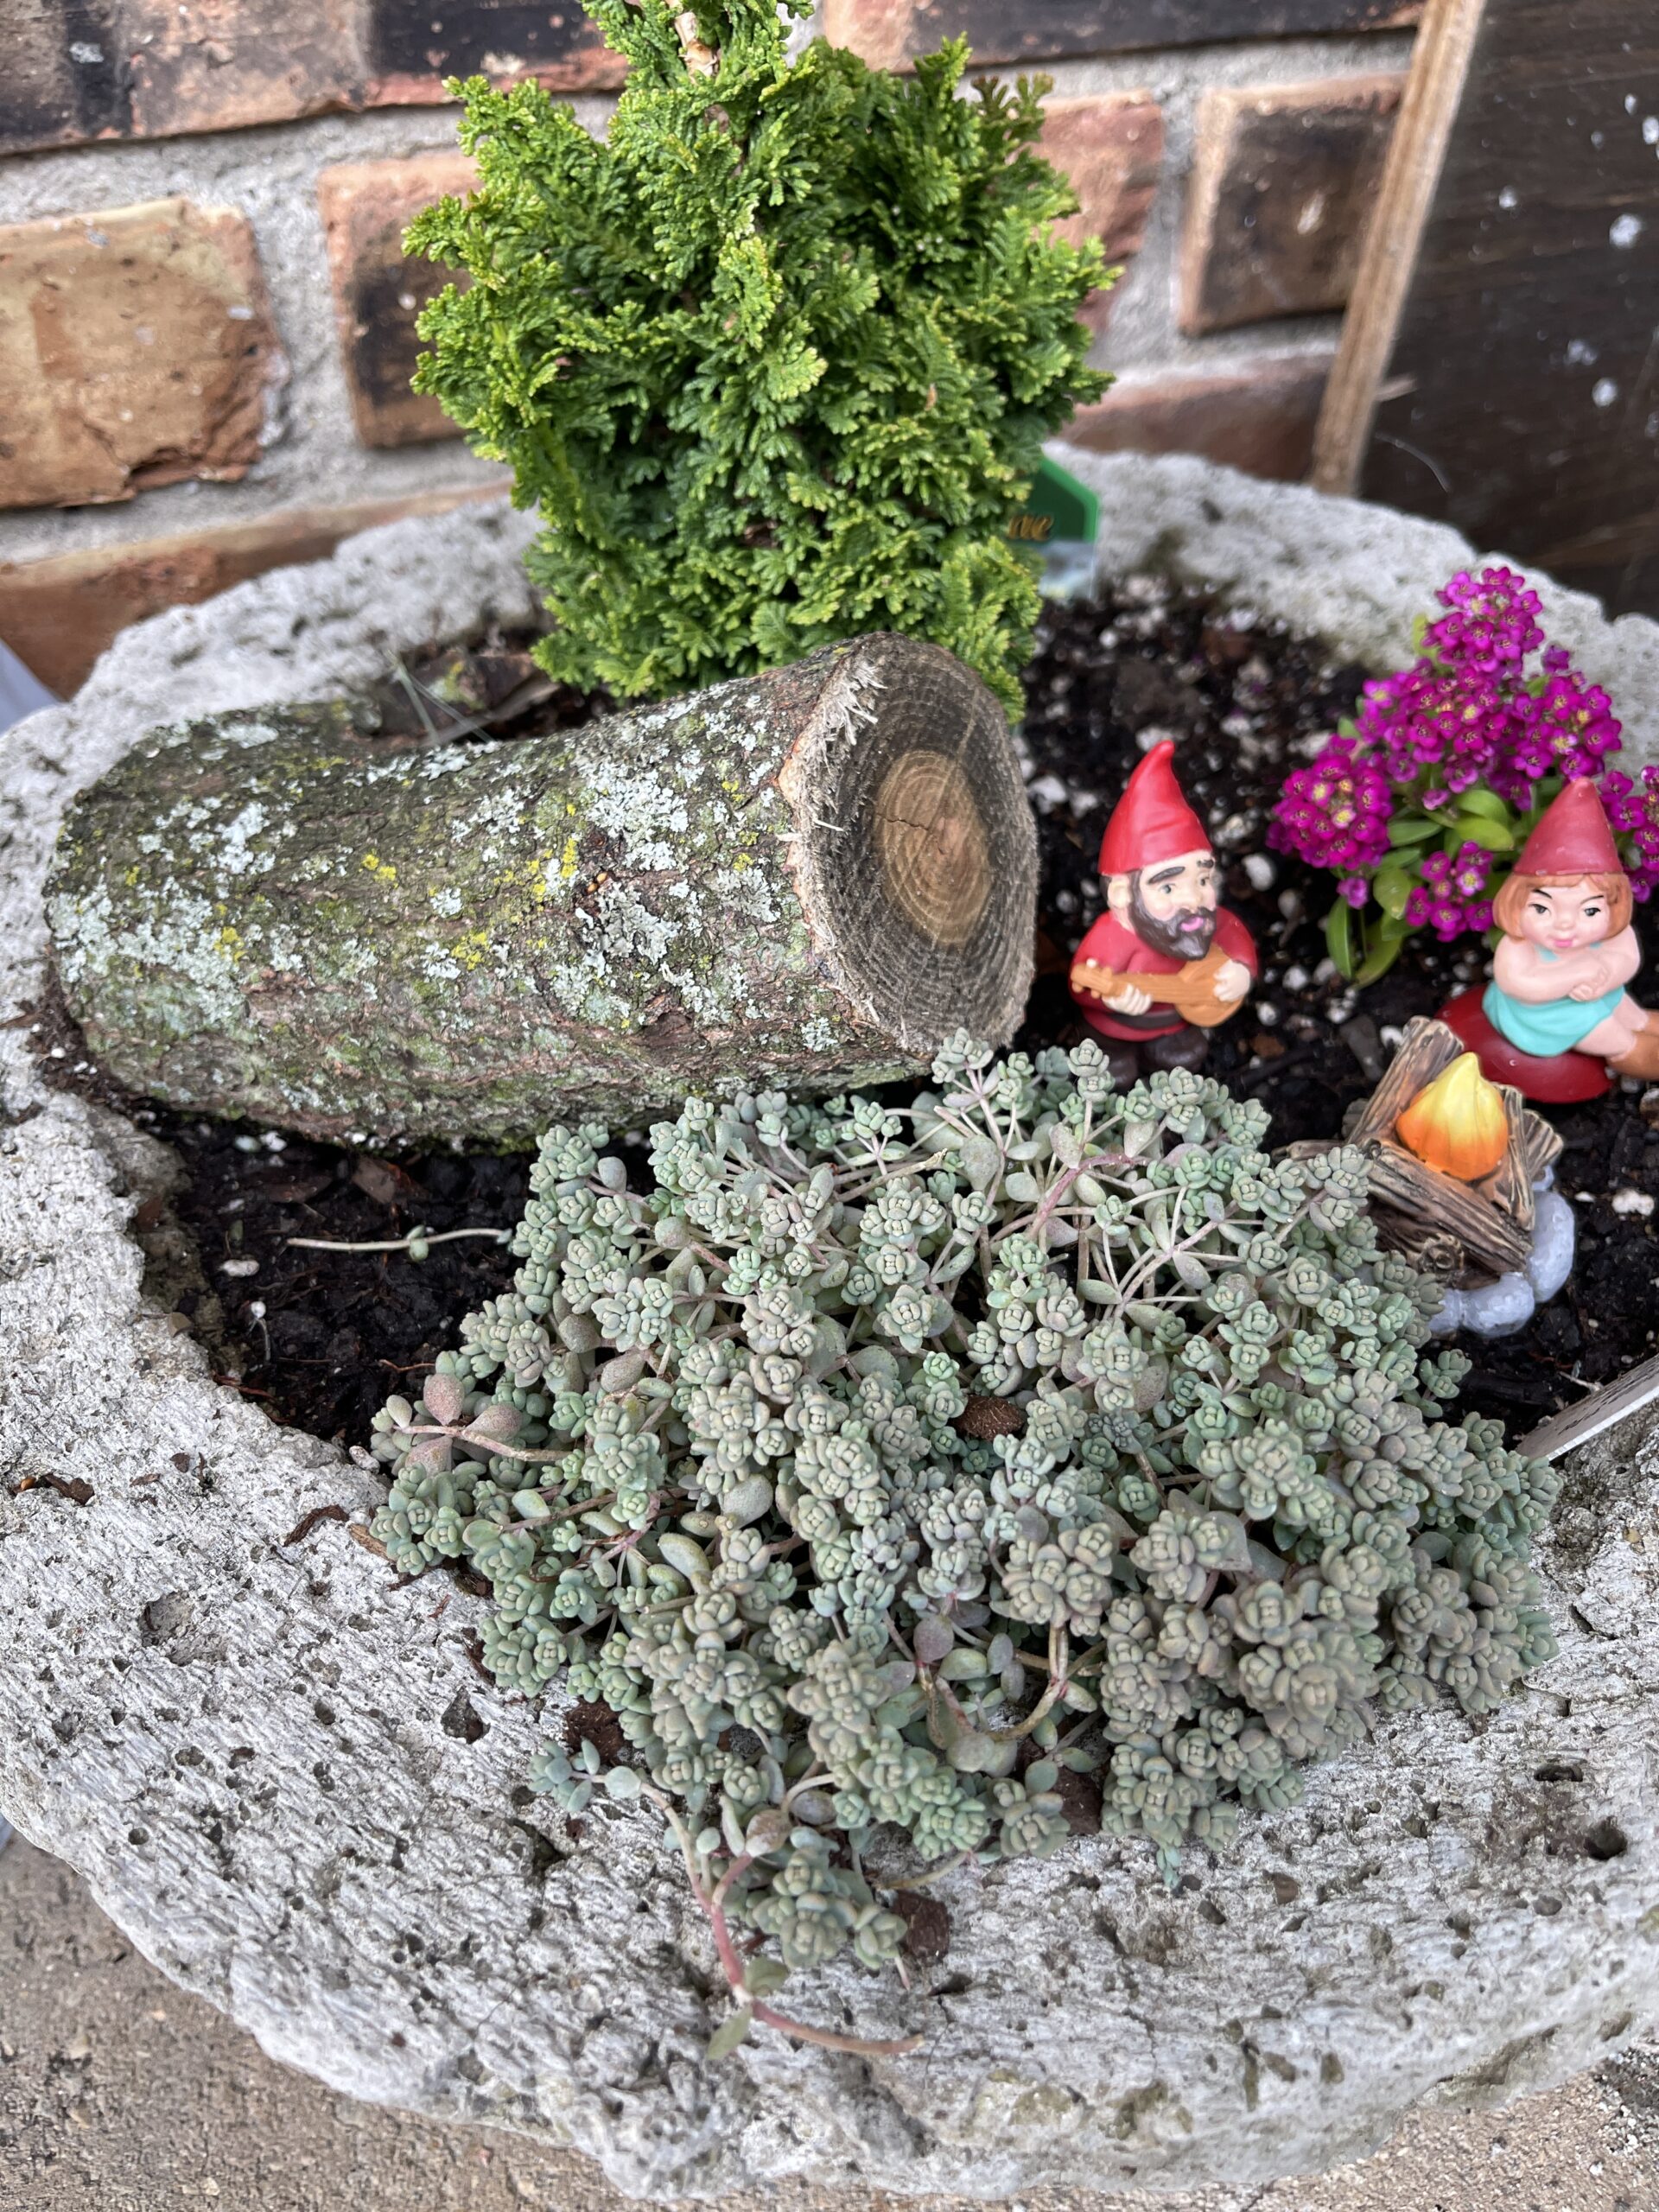 Fairy garden with gnomes, little tree, and log.